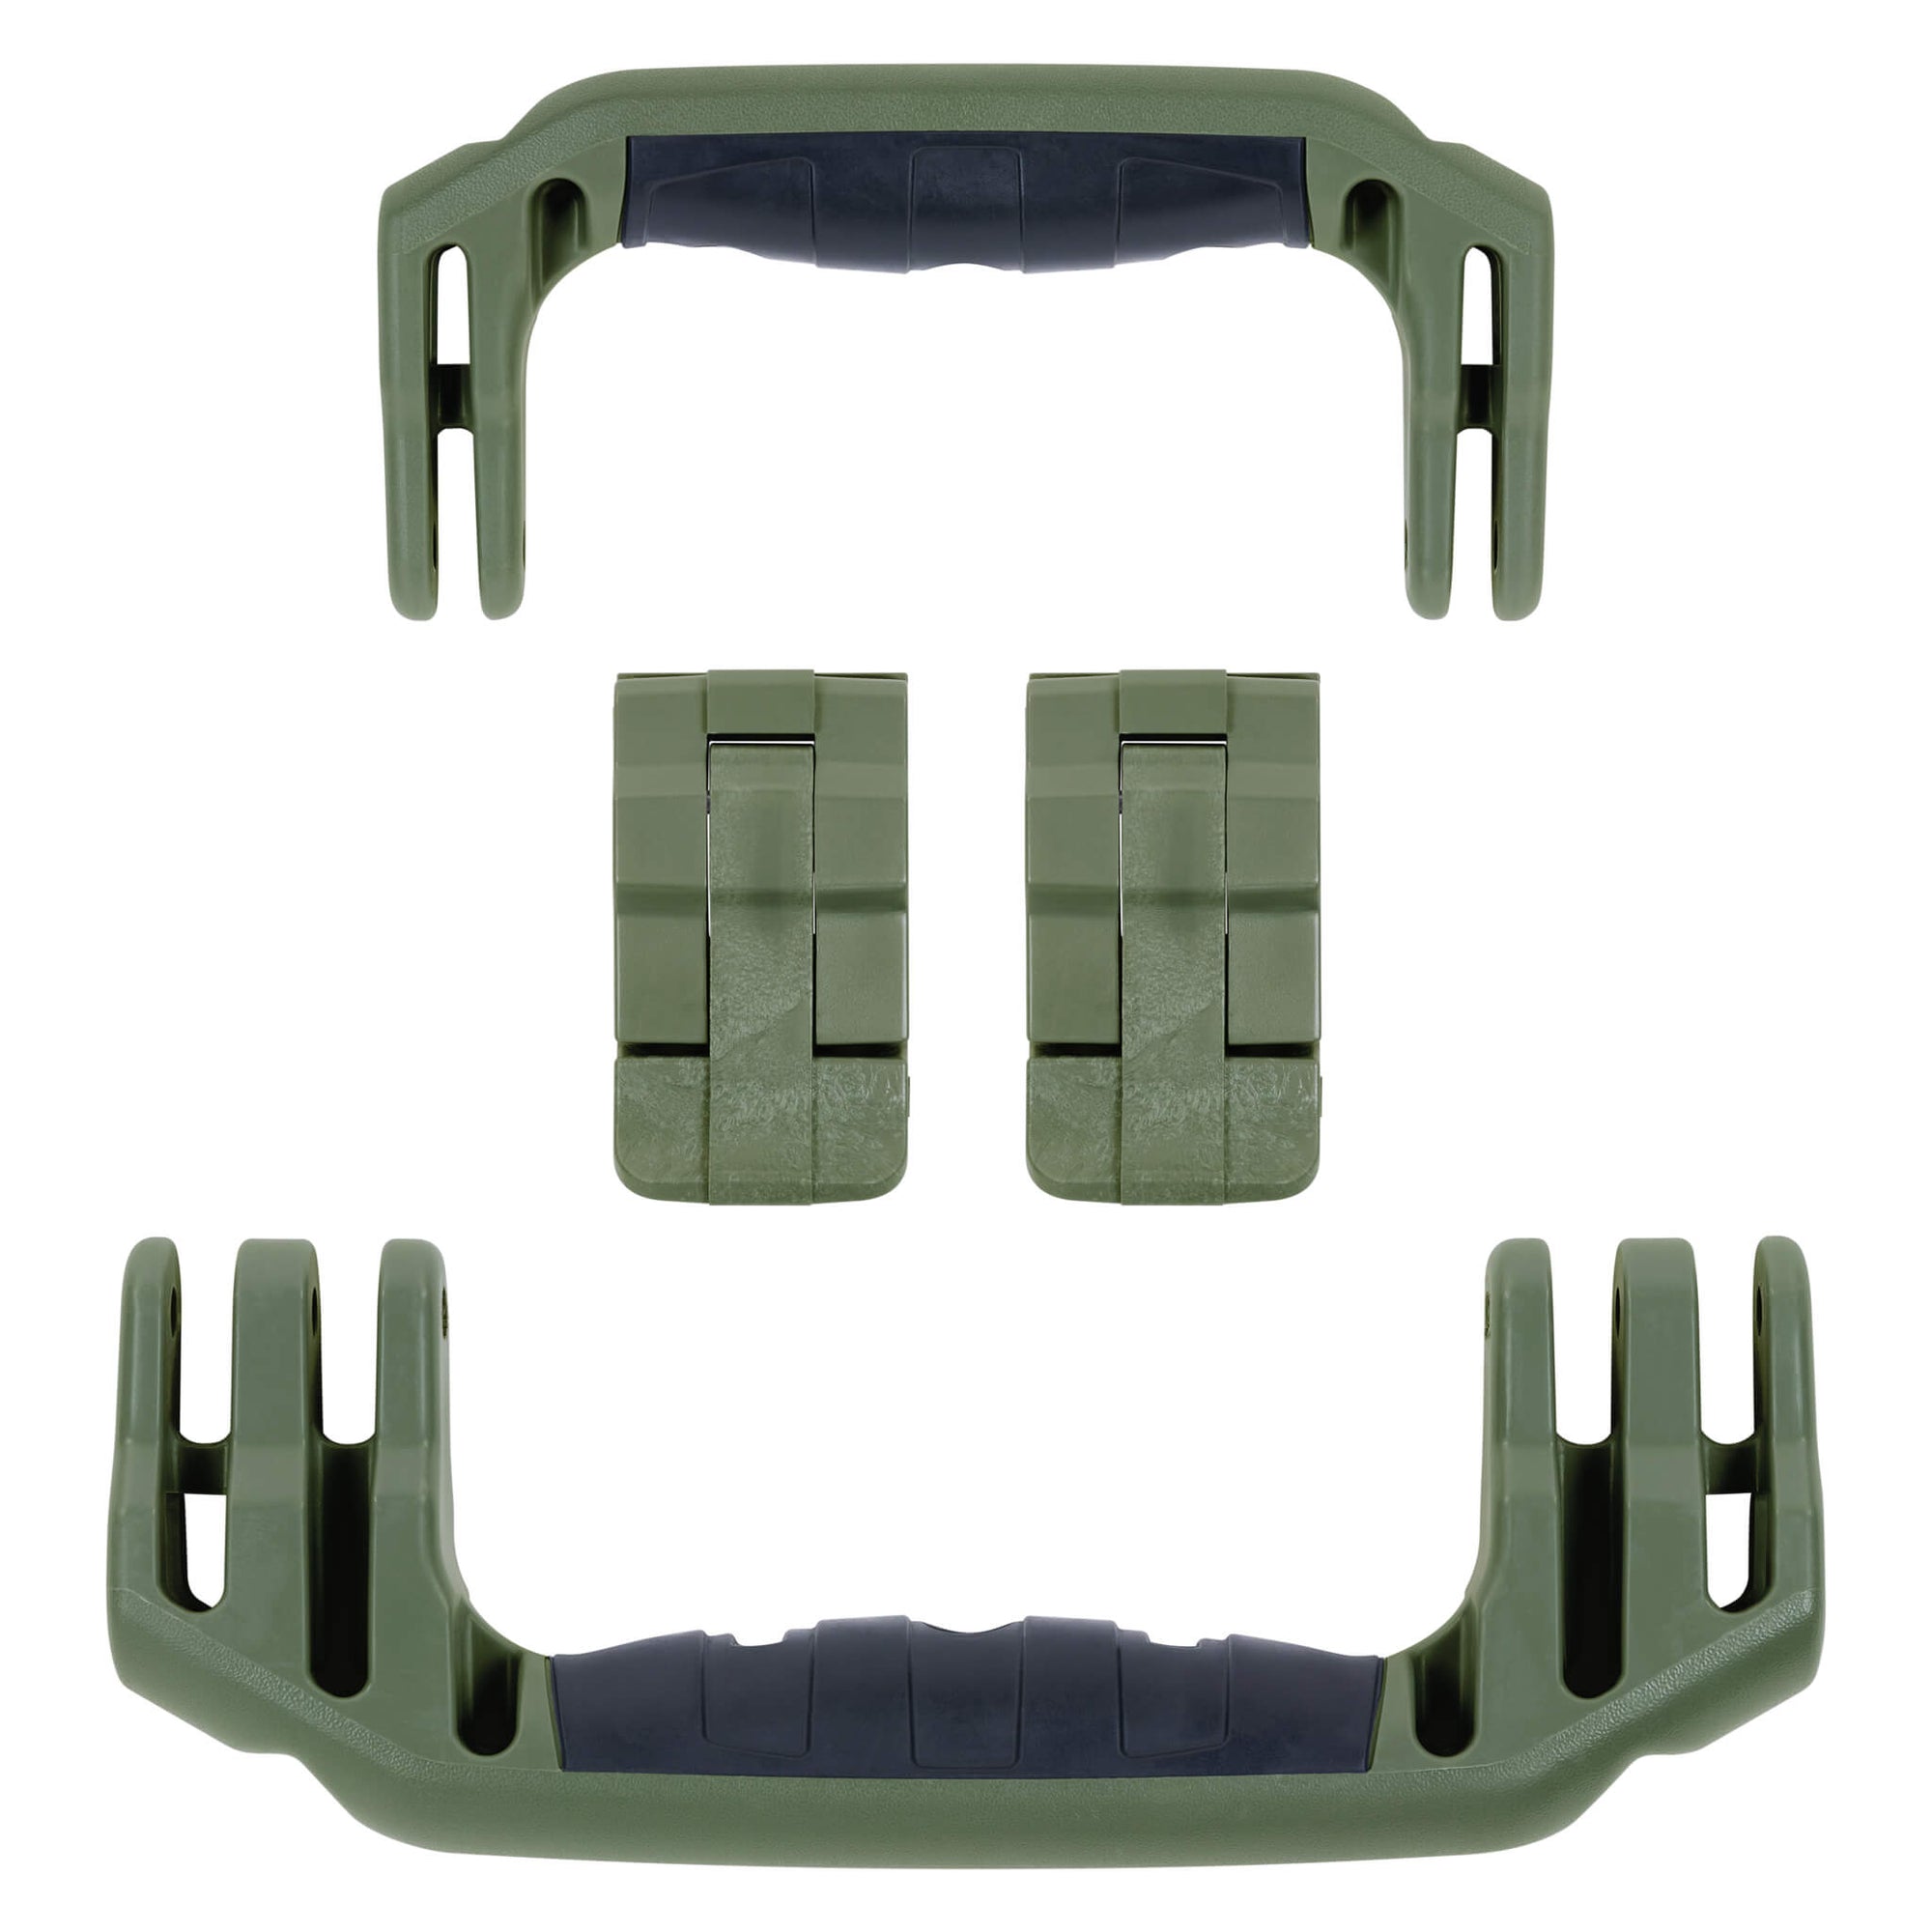 Pelican 1560 Replacement Handles & Latches, OD Green (Set of 2 Handles, 2 Latches) ColorCase 